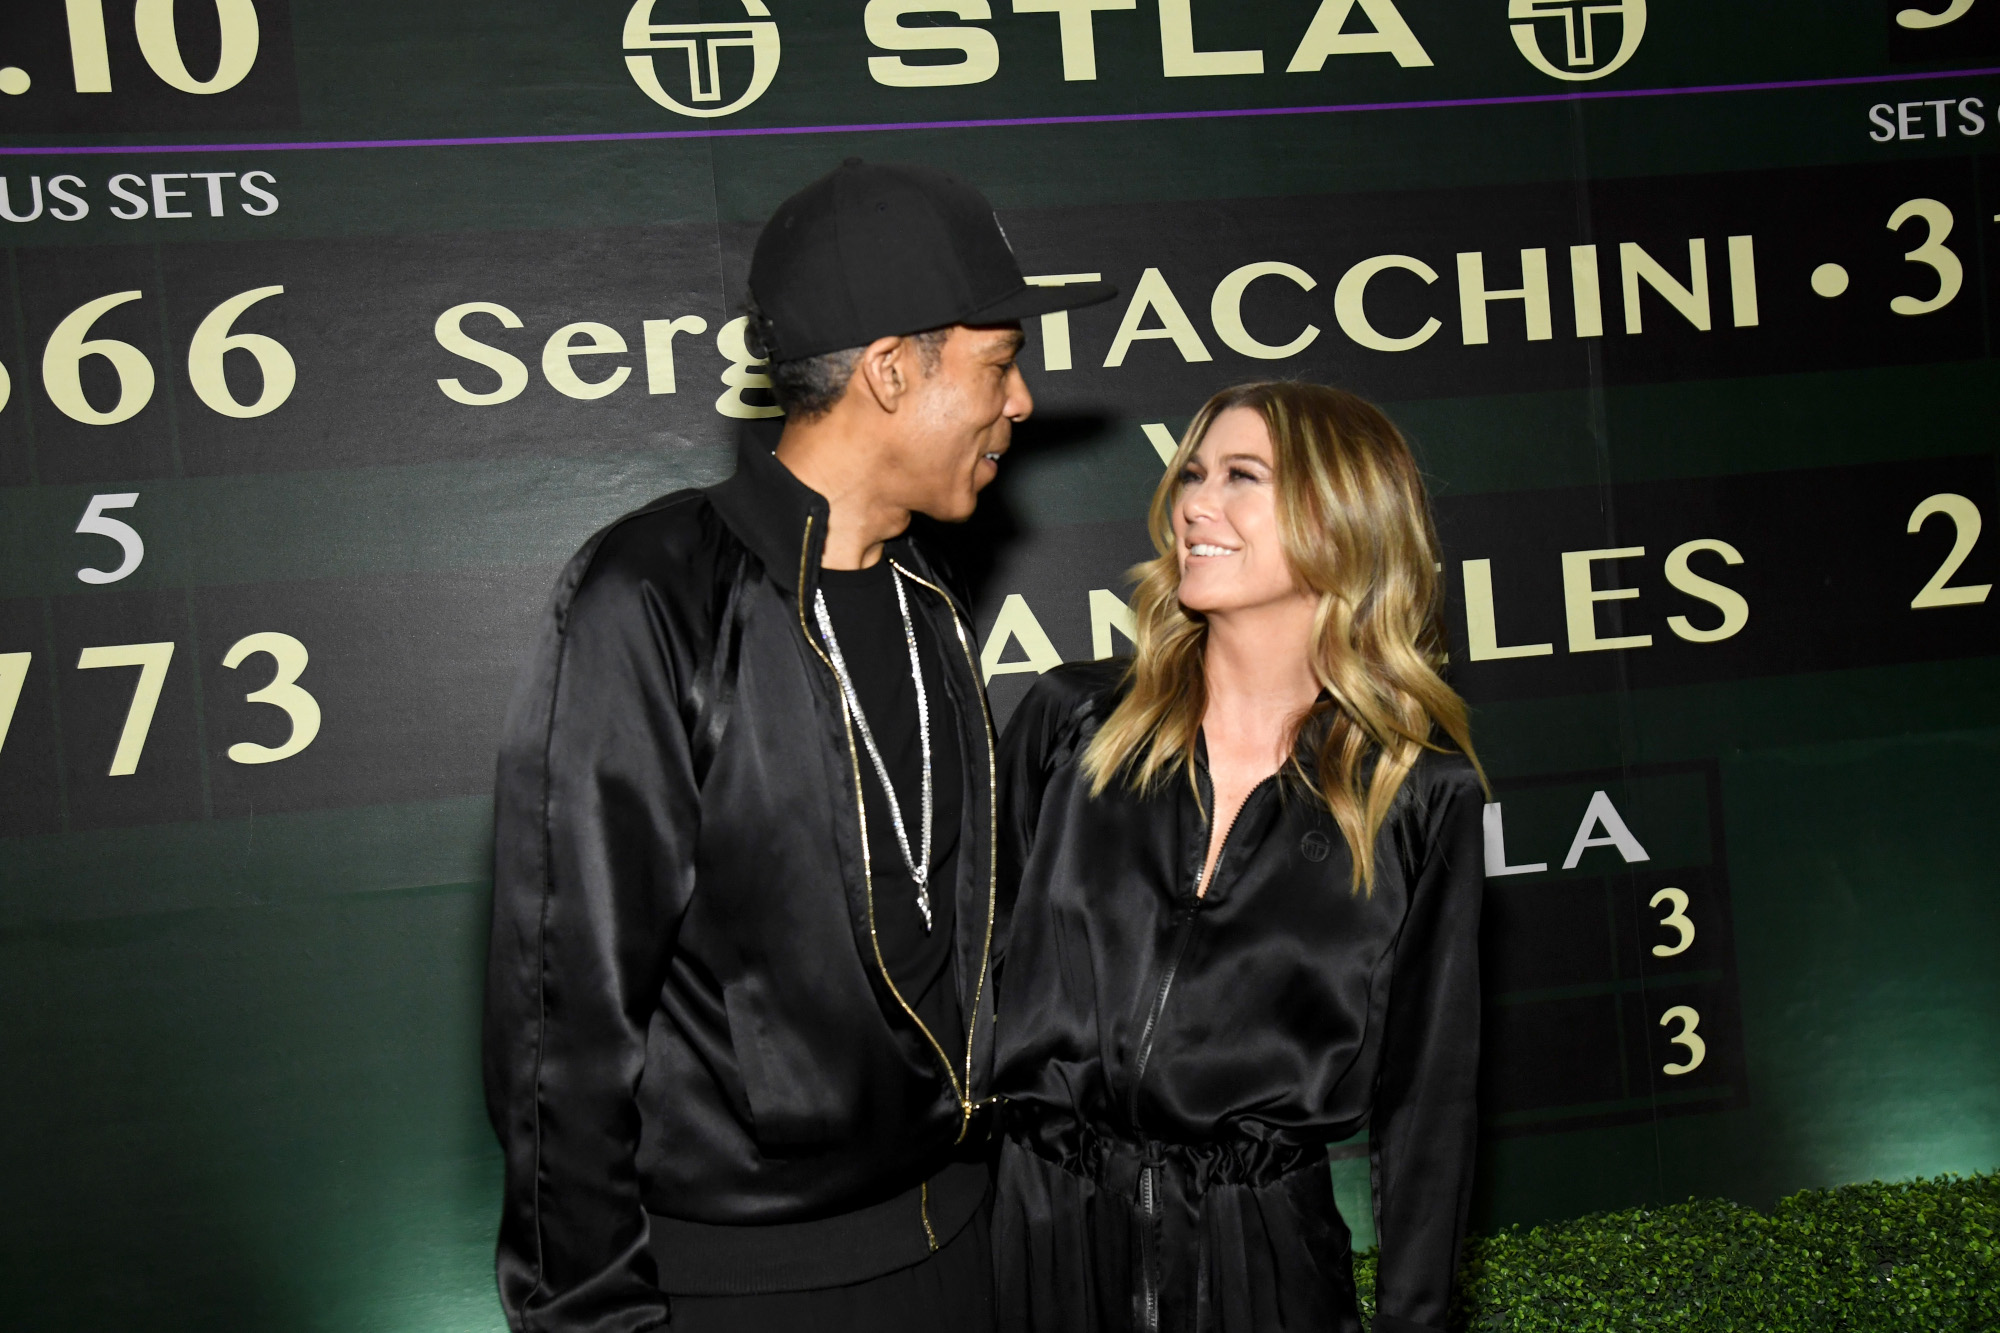 Grey's Anatomy star Ellen Pompeo with husband Chris Ivery. Both are wearing black formalwear and smiling while looking into each other's eyes.